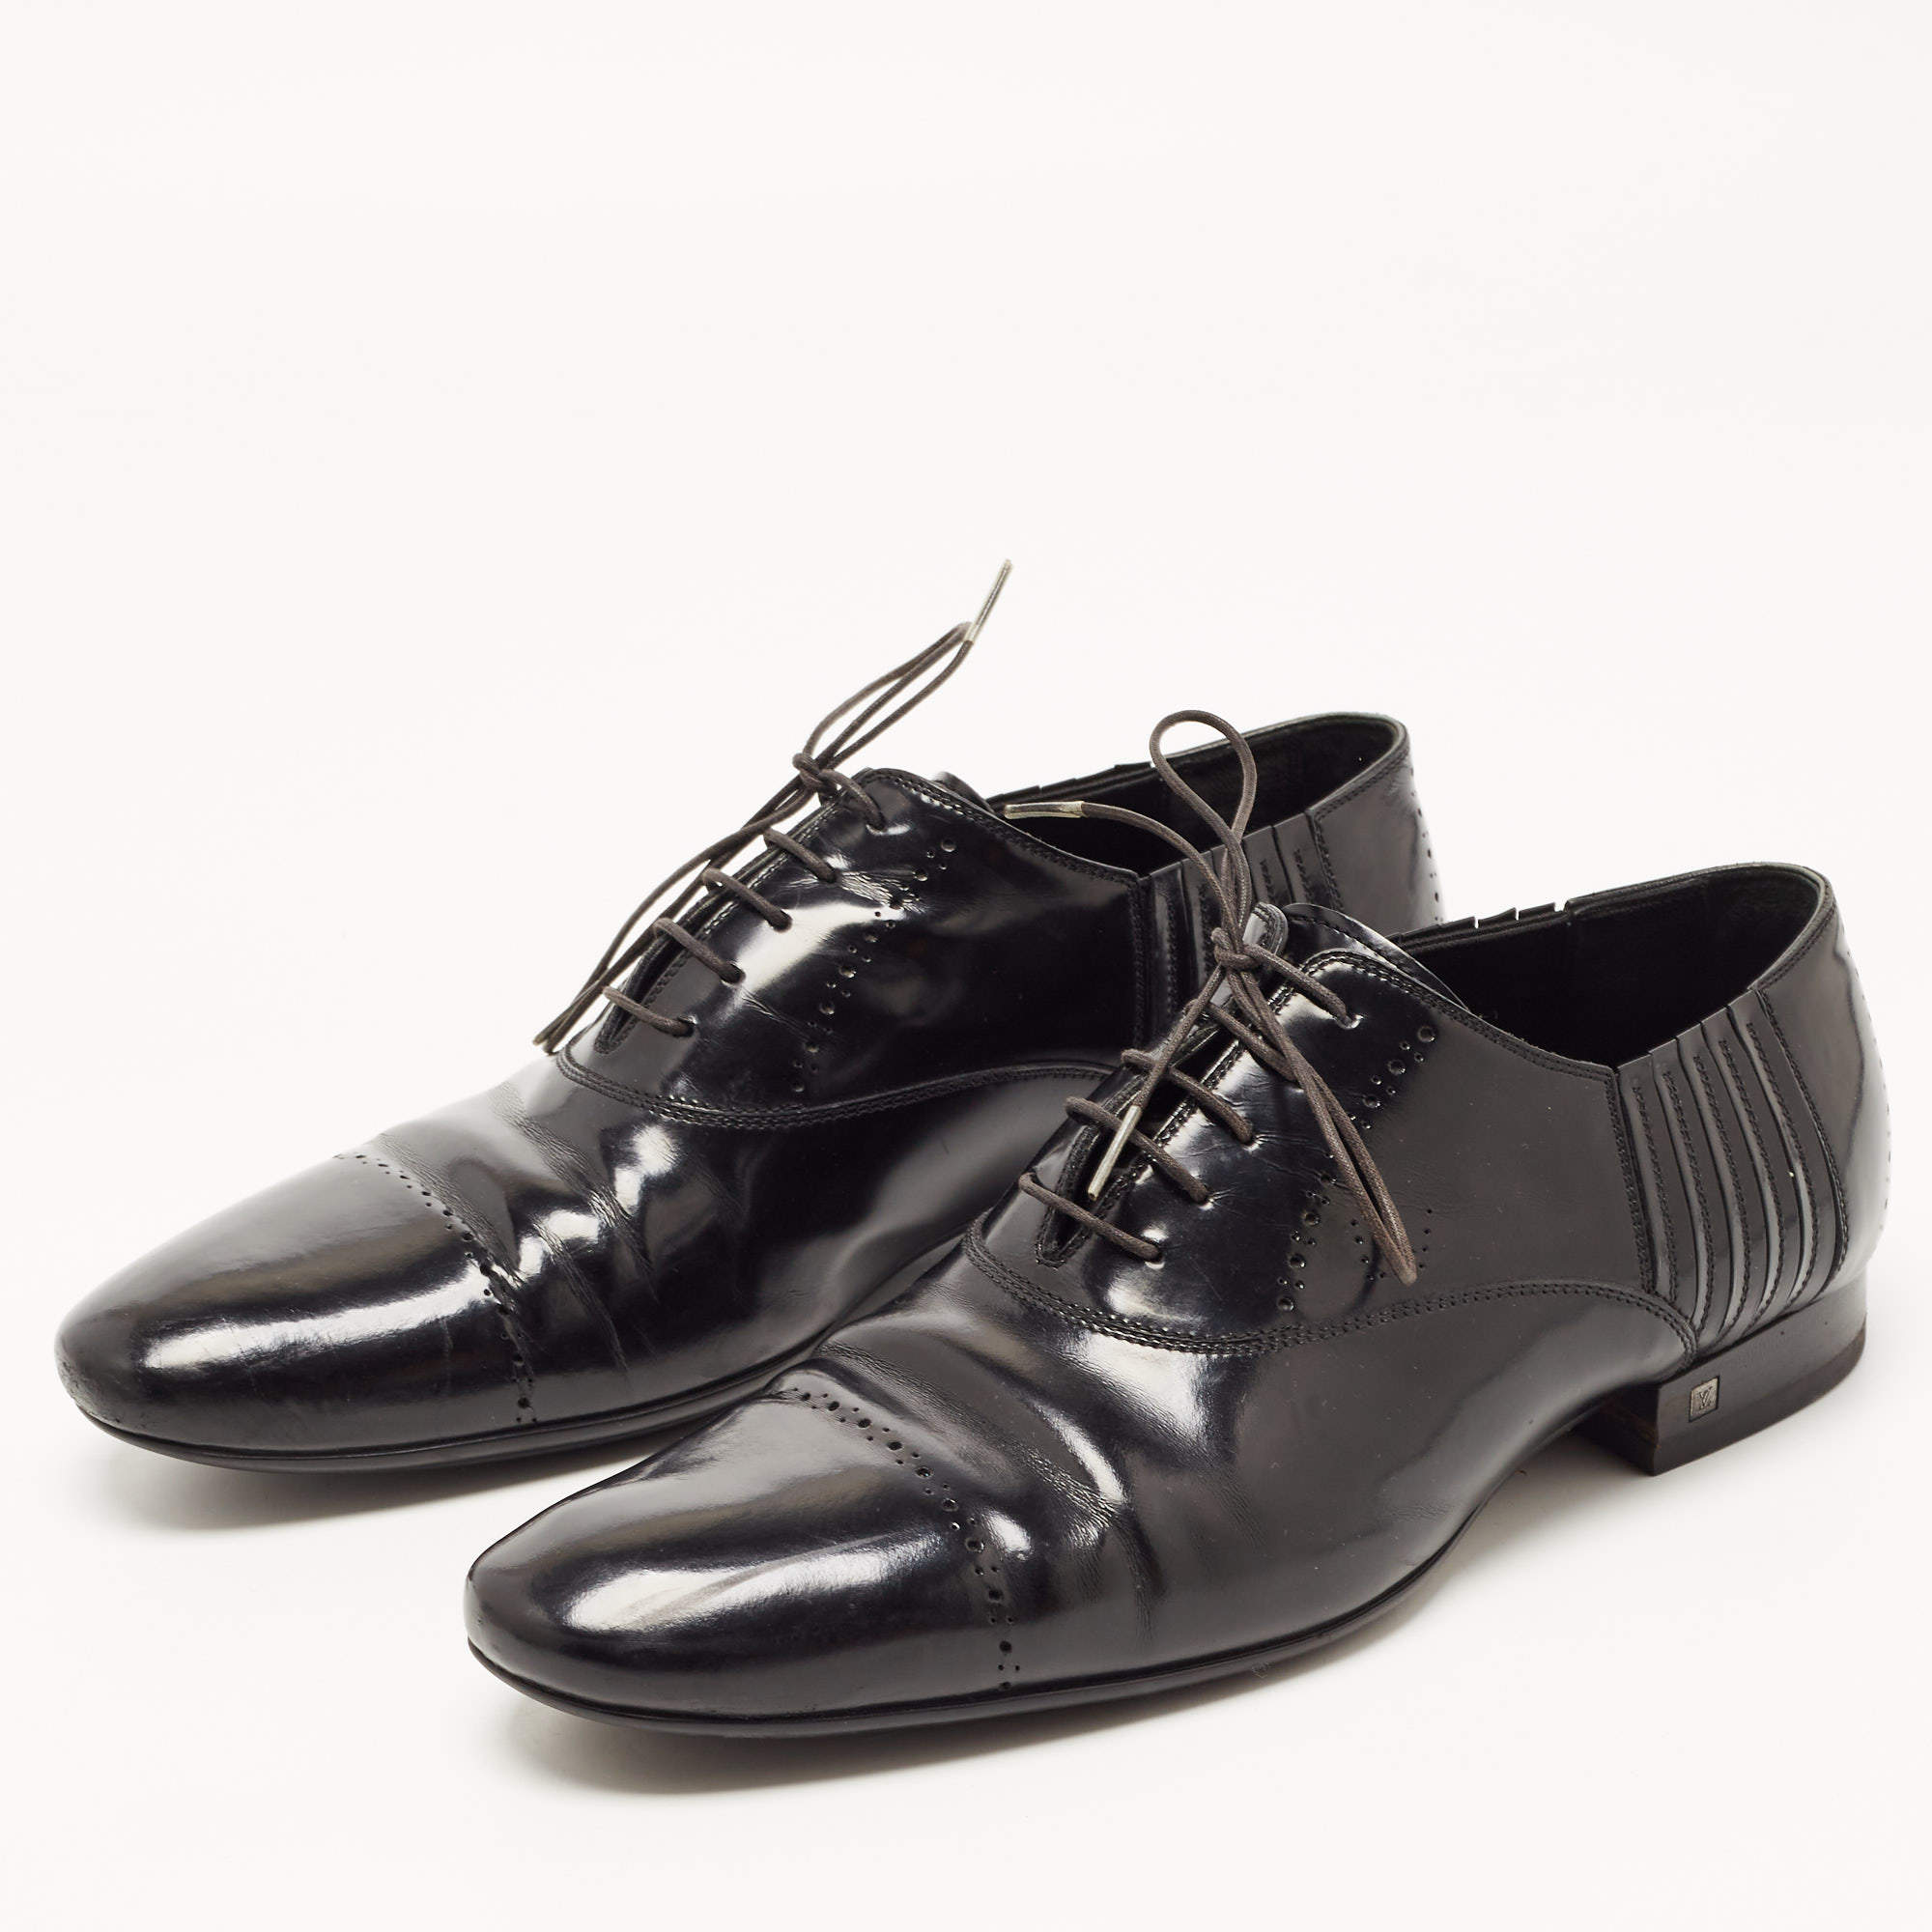 LOUIS VUITTON TEAM DERBY SHOES 7 41 SNEAKERS IN LEATHER AND BLACK